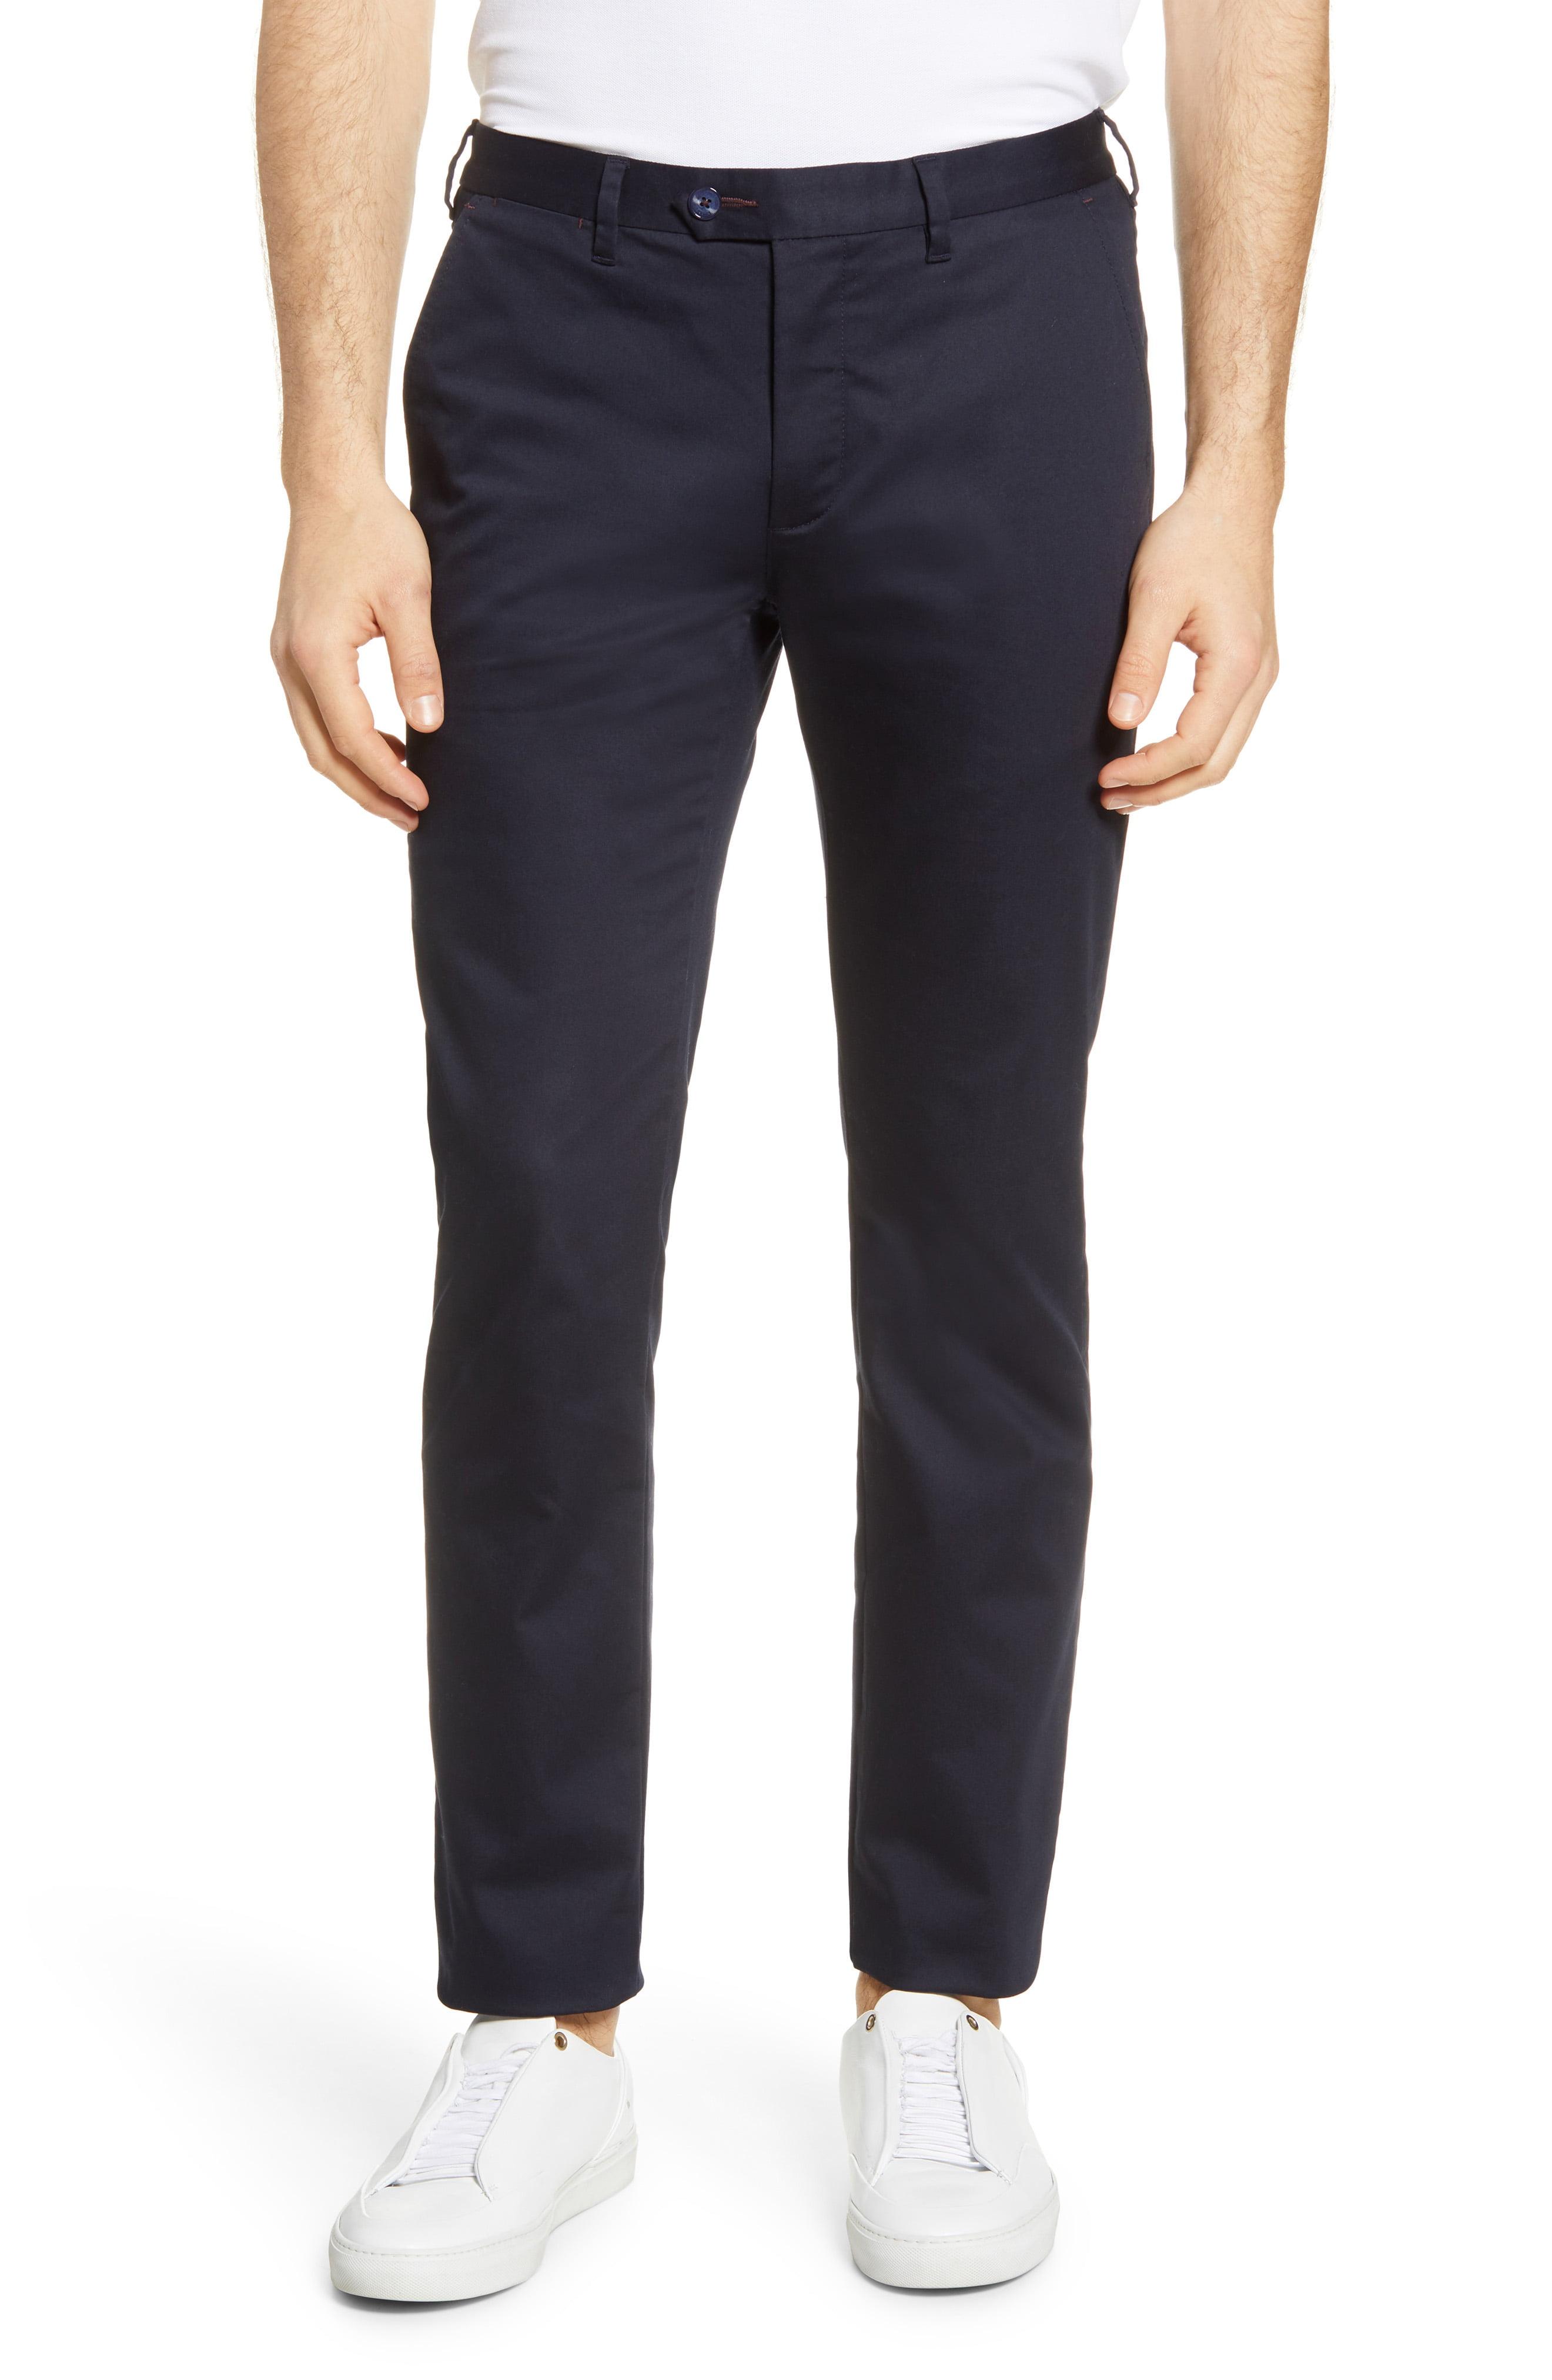 Ted Baker Slim Fit Smart Satin Chino Pants in Navy (Blue) for Men - Lyst